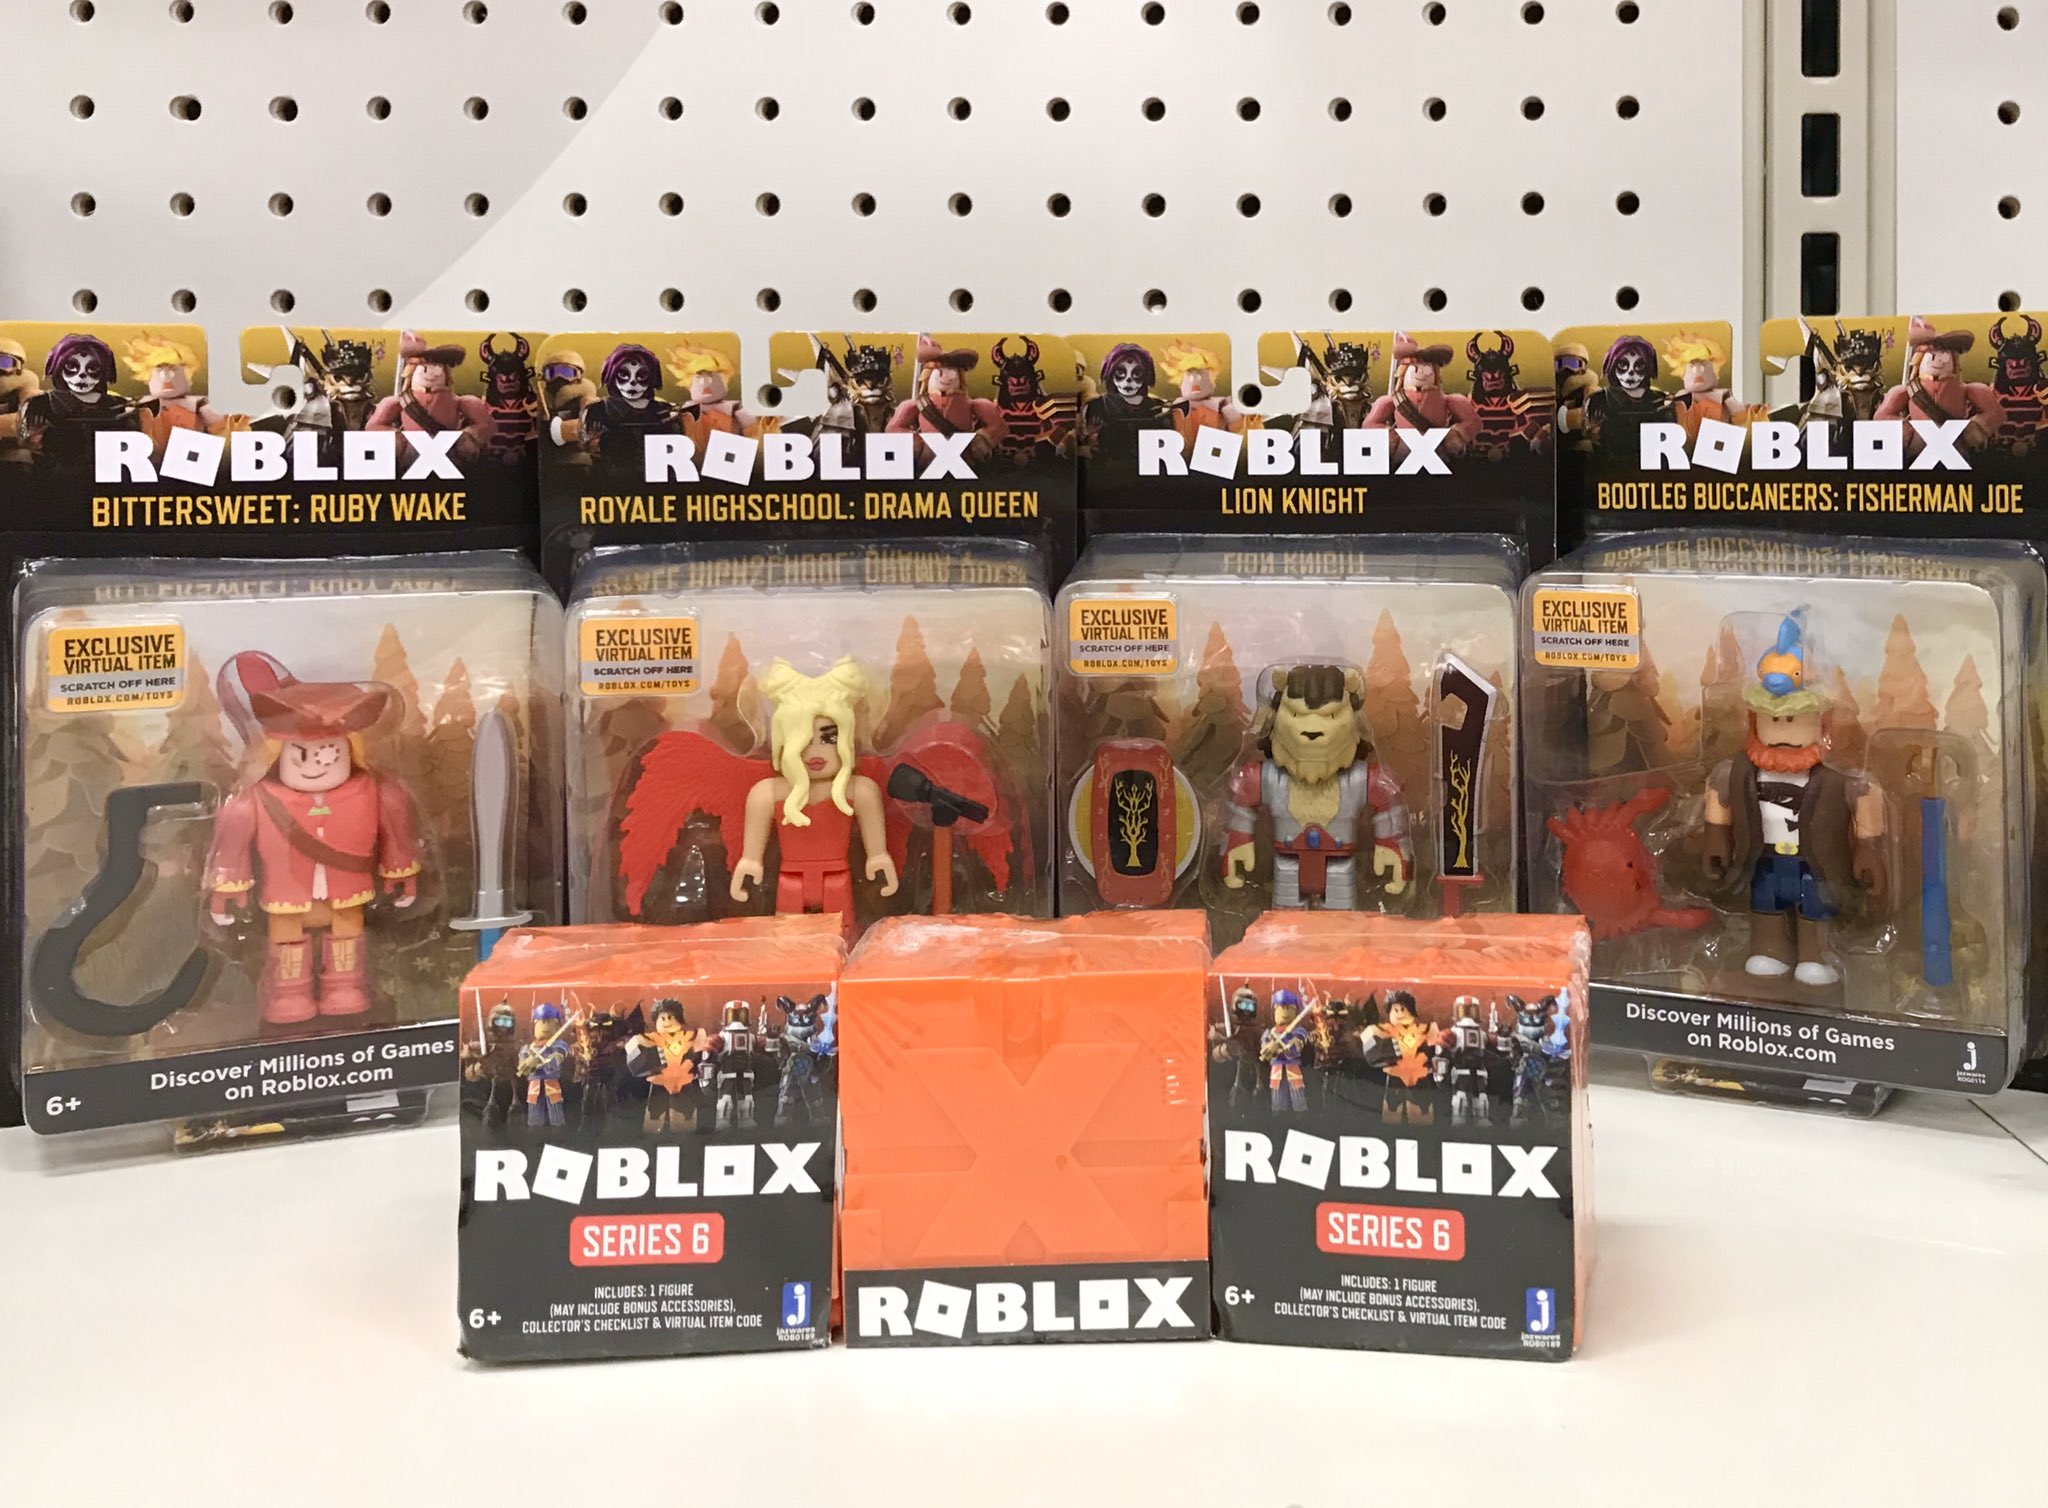 Lily On Twitter Target Shelves Kinda Empty In The Roblox And Minecraft Section But Full Of Fortnite And Horror Merch I Did Find A Few New Celeb Core Packs And Orange Blind - roblox bittersweet codes